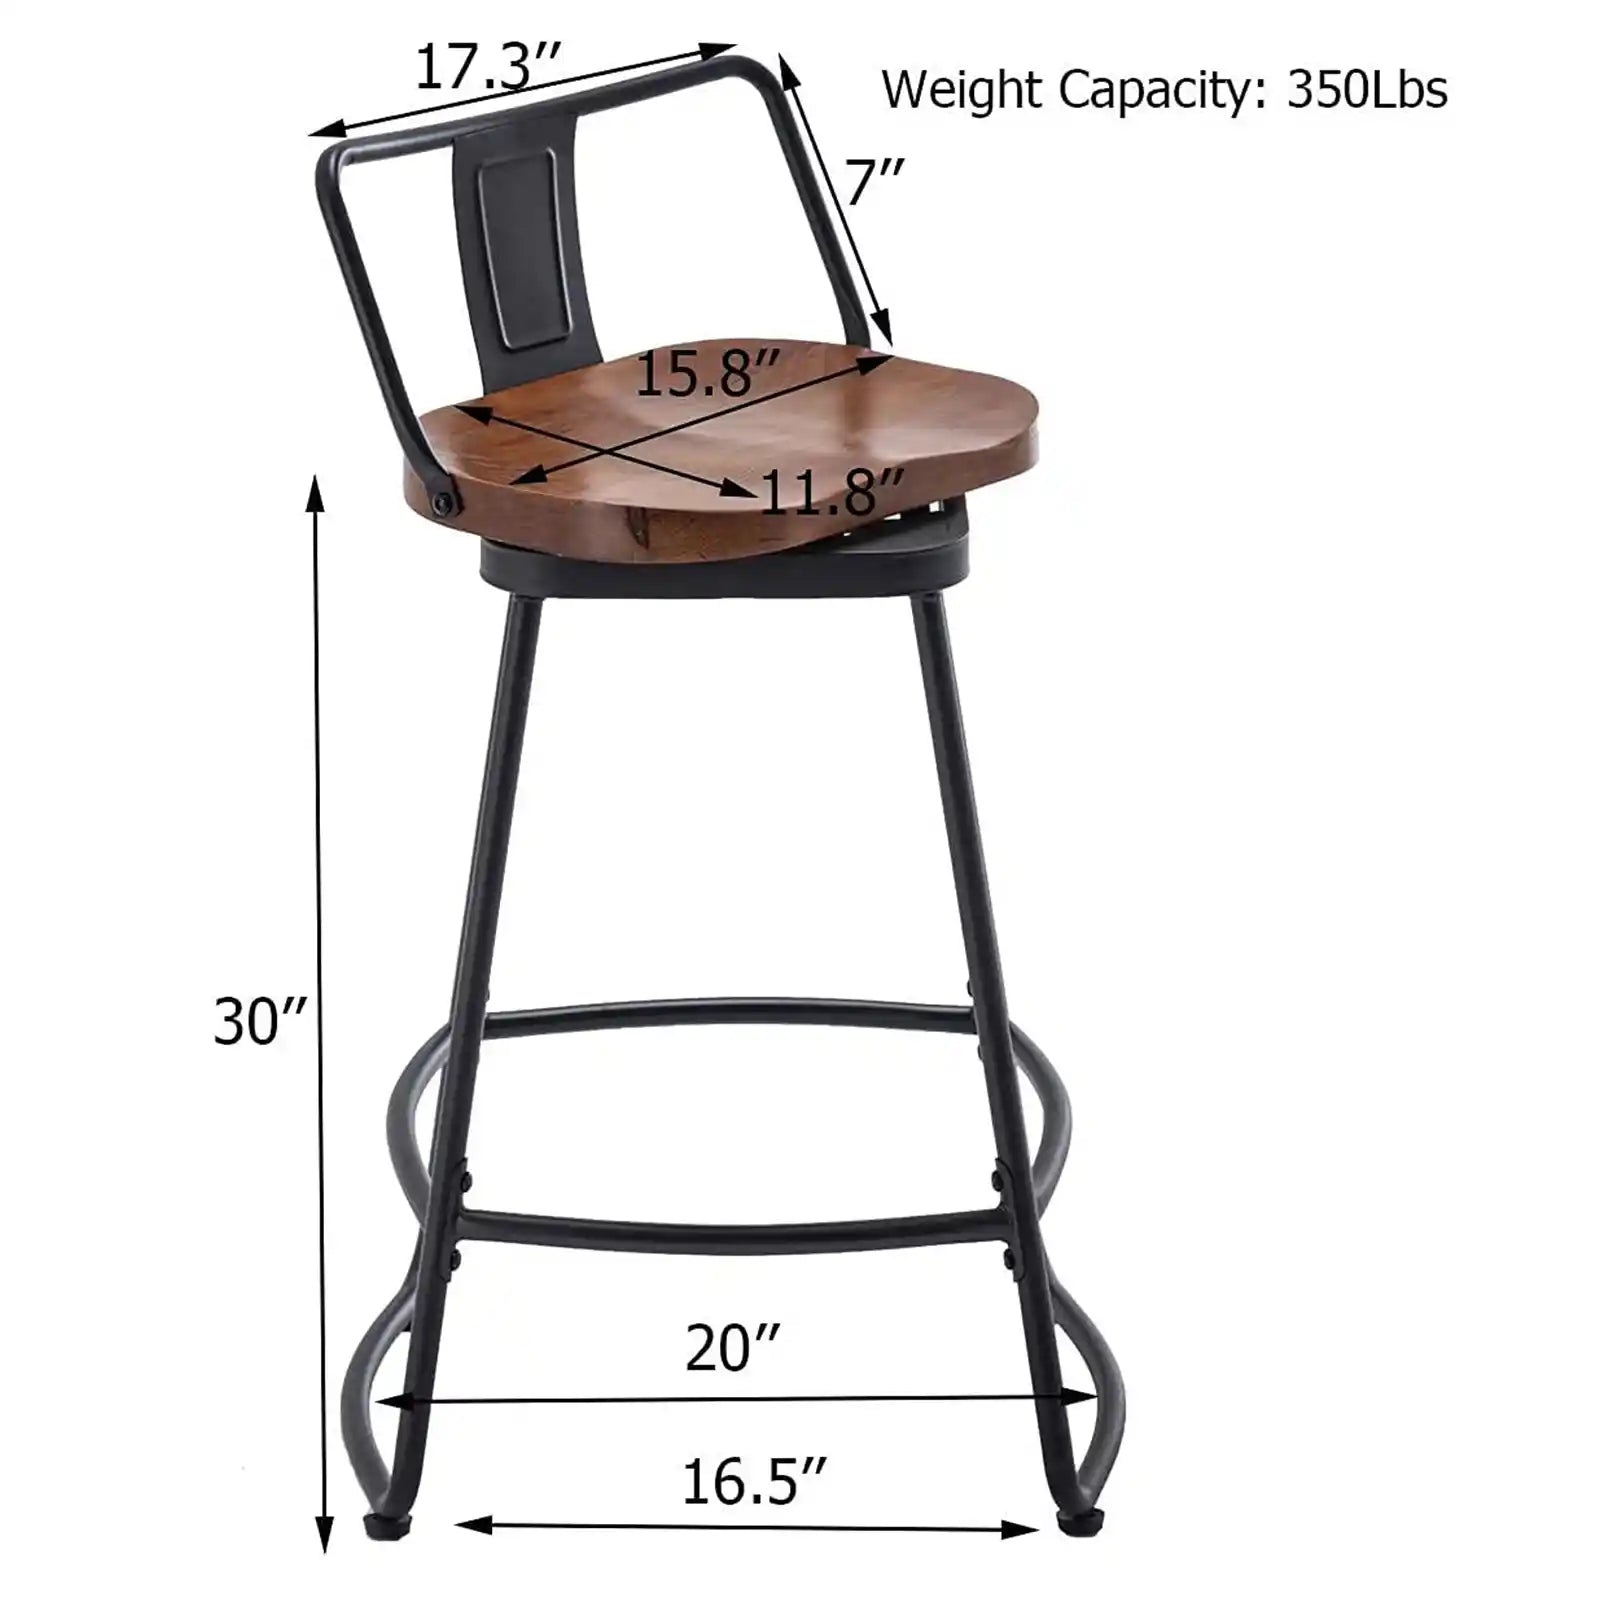 Bar Stools Set of 2 Swivel Counter Height Stools, 24 Inch, 26 Inch, 30 Inch